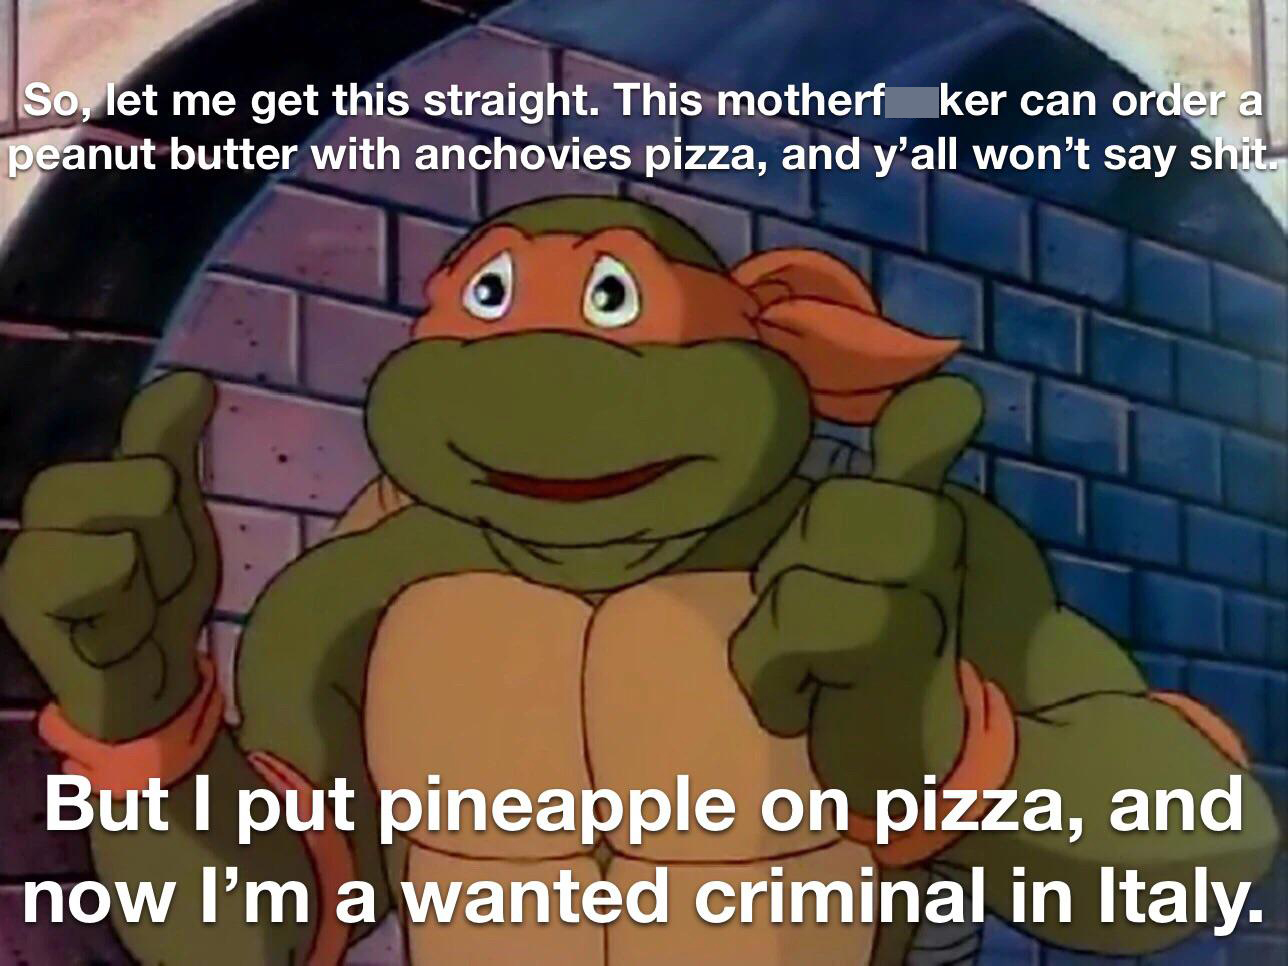 funny memes and pics - cartoon - So, let me get this straight. This motherf ker can order a peanut butter with anchovies pizza, and y'all won't say shit. 3 But I put pineapple on pizza, and now I'm a wanted criminal in Italy.